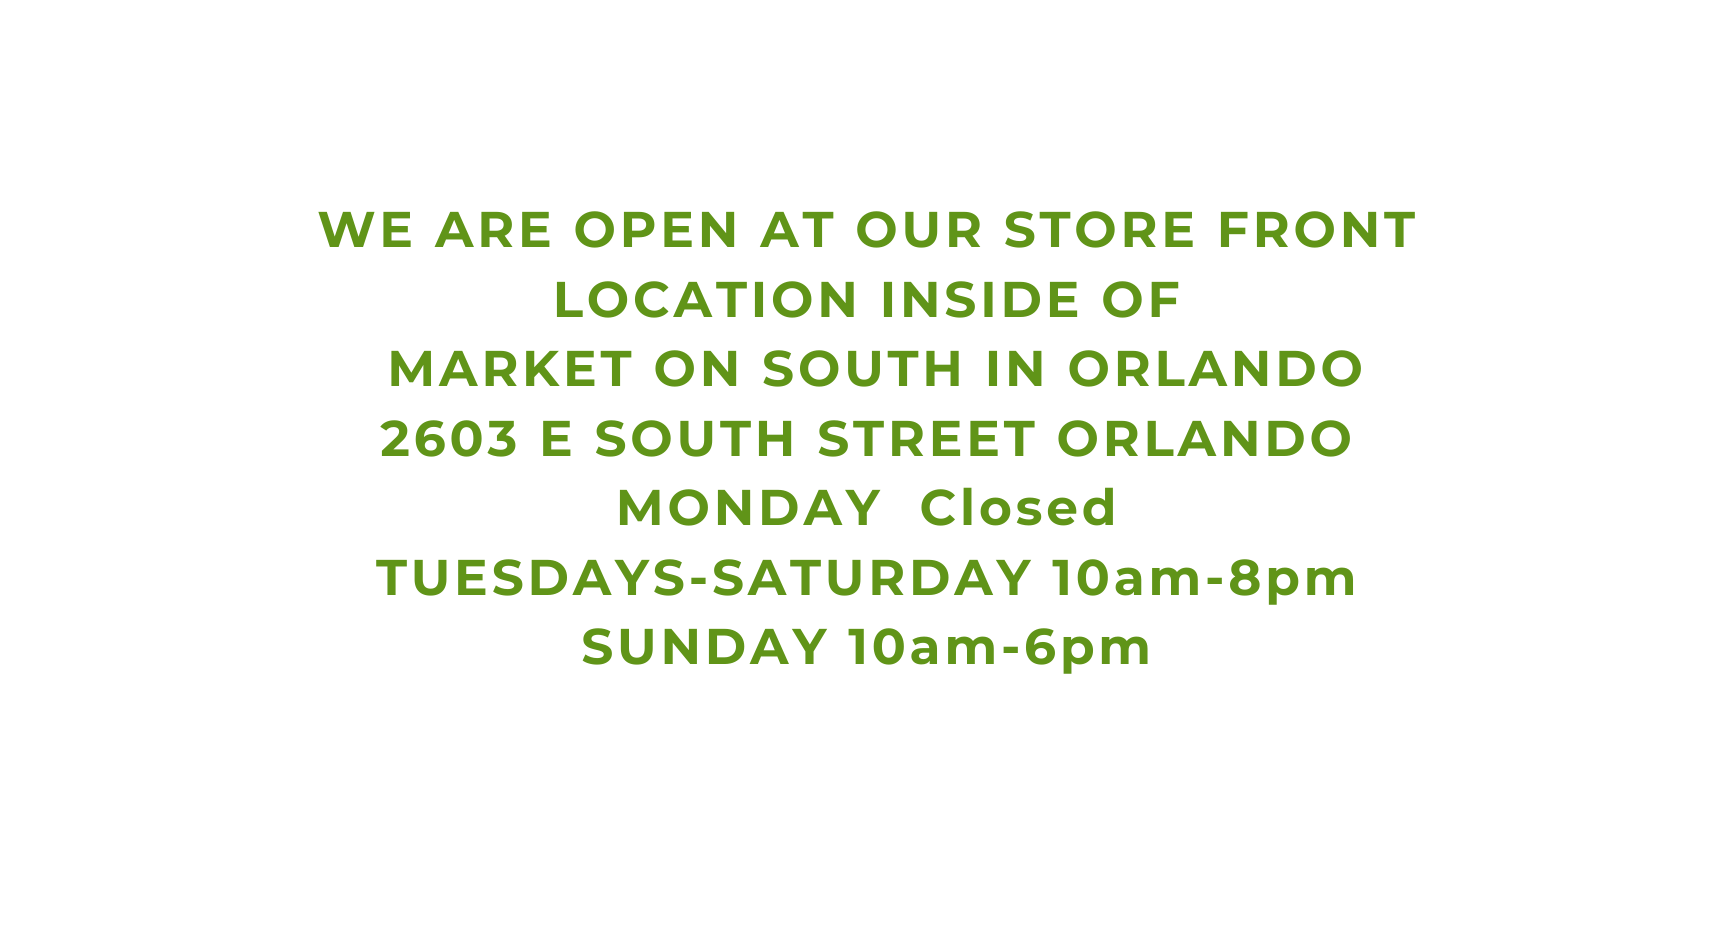 WE ARE OPEN AT OUR STORE FRONT LOCATION INSIDE OF MARKET ON SOUTH IN ORLANDO 2603 E SOUTH STREET ORLANDO MONDAY Closed TUESDAYS SATURDAY 10am 8pm SUNDAY 10am 6pm